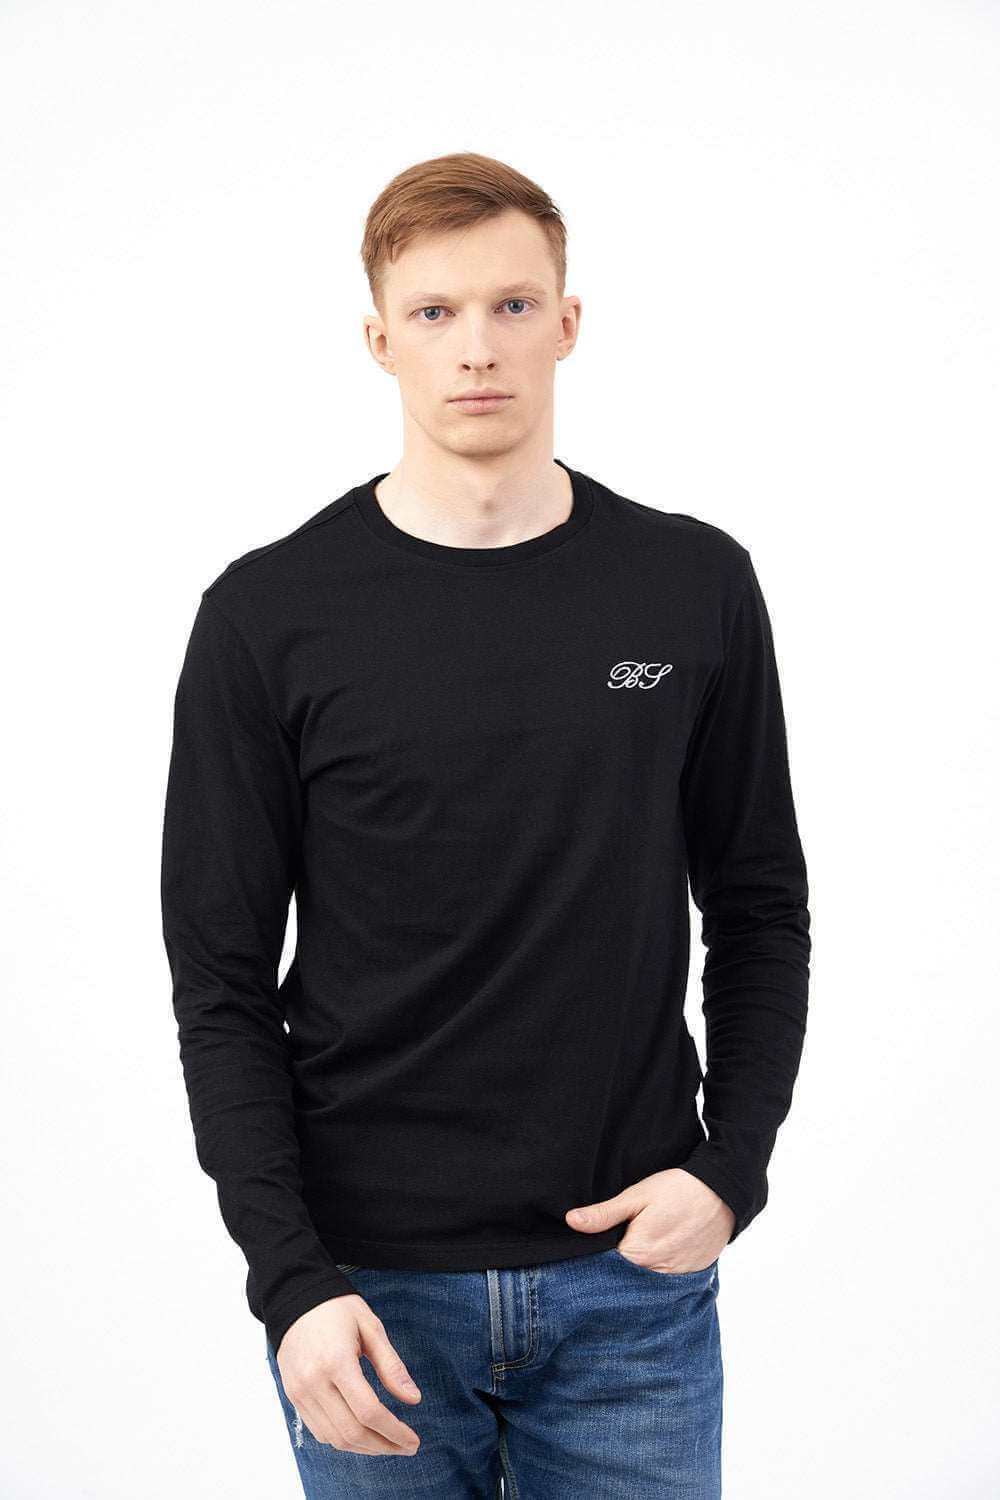 Front View of Crew Neck Men's Shirts in Black